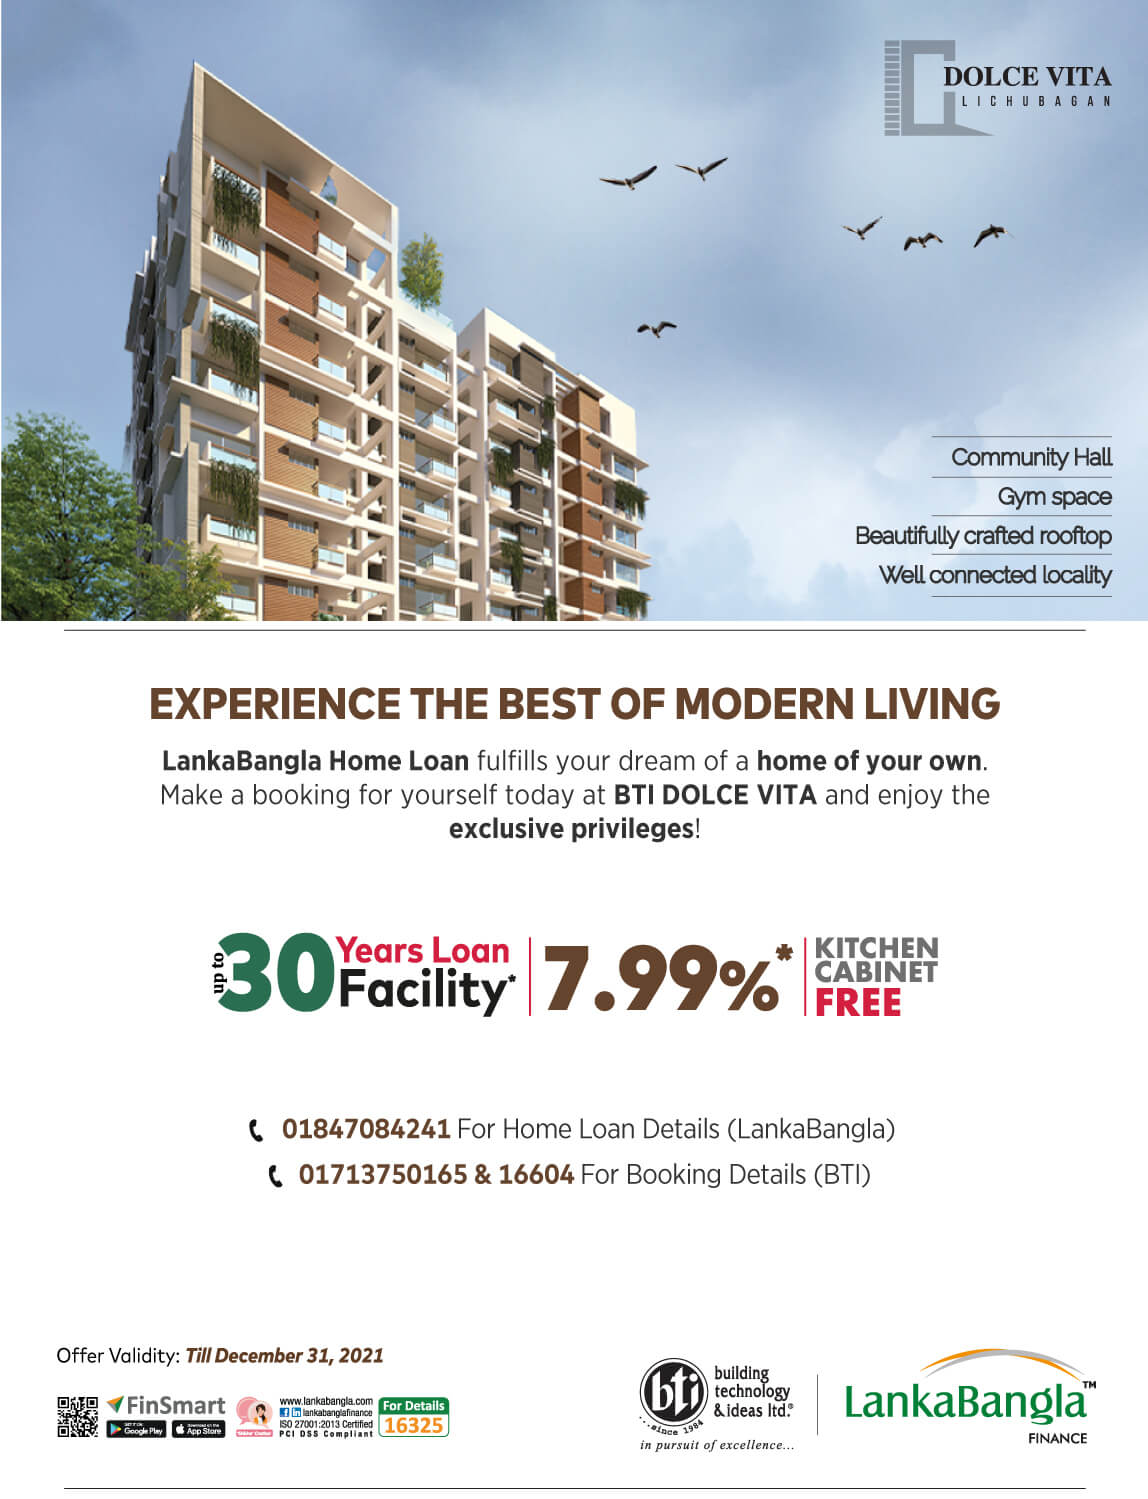 Experience the Best of Modern Living